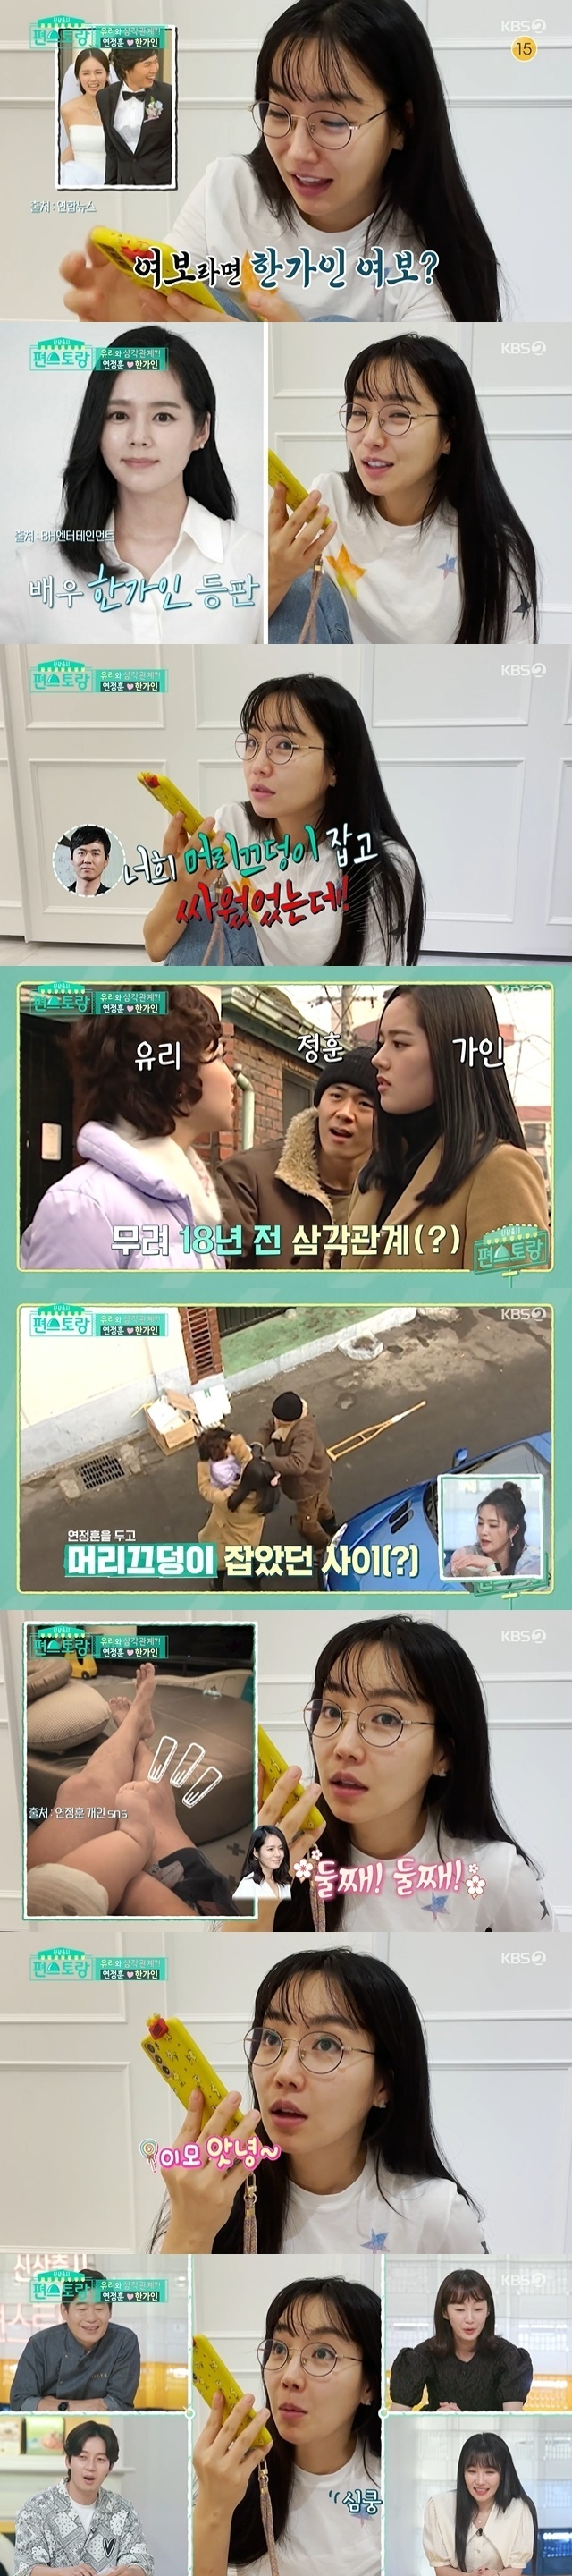 Han Gain and Yeon Jung-hoons 3-year-old son made a surprise call, holding a heartbeat with only a voice.In the 91st KBS 2TV entertainment Stars Top Recipe at Fun-Staurant (hereinafter referred to as Stars Top Recipe at Fun-Staurant) broadcast on August 6, the chefs who challenged the development of the 30th confrontation theme rice menu were portrayed.Lee Yoo-ri called somewhere for a unique rice menu study, and the other person was Yeon Jung-hoon, who is currently appearing in the entertainment show One Night and Two Days.Lee Yoo-ri assumed that he would have had as many foods as he usually traveled because of the program.The two men also briefly unravelled the episode before the confrontational task conversation, during which Yeon Jung-hoon gave Lee Yoo-ri a phone call to Han GainHan Gain, who received the phone call after the call Honey, said, Hello.Lee Yoo-ri called Han Gain the prettiest actor in our country and said its been too long.Lee Yoo-ri then told Han Gain, I was a lover with me, and attracted Eye-catching.This was a reference to the past triangles between Yeon Jung-hoon in Drama.Yeon Jung-hoon recalled, You fought your head in the head, while listening to the conversation next door.Lee Yoo-ri said, I was married to me, but they married, he said, referring to the fact that he had been breathing with Yeon Jung-hoon and other Drama recently.When I saw it, I laughed and asked me to think about each others love. I thought about my husband, so I told my brother to think about Gain When my brother and sister (Drama) came out, they had an awkward feeling, Han Gain responded.Also on this day, the voice of the second son of Han Gain Yeon Jung-hoon couple was also revealed.The son of the couple who turned three this year made Lee Yoo-ri heartbreaking with a word Goodbye aunt.Han Gain later told Lee Yoo-ri, The second time I saw a script photo with my sister and brother, I said, Why is our father with another woman? I dont know because shes still a baby.Father was not a mother but a woman who took a picture? He said a cute anecdote and attracted Eye-catching.Lee Yoo-ri was recommended as a fresh menu for Yeon Jung-hoon on the day.Lee Yoo-ri of the studio praised the Han Gain Yeon Jung-hoon couple for saying, So is my brother Yeon Jung-hoon and Mr. Gain is too hairy and cool.It was time to confirm the warm affection of Han Gain Yeon Jung-hoon couple.